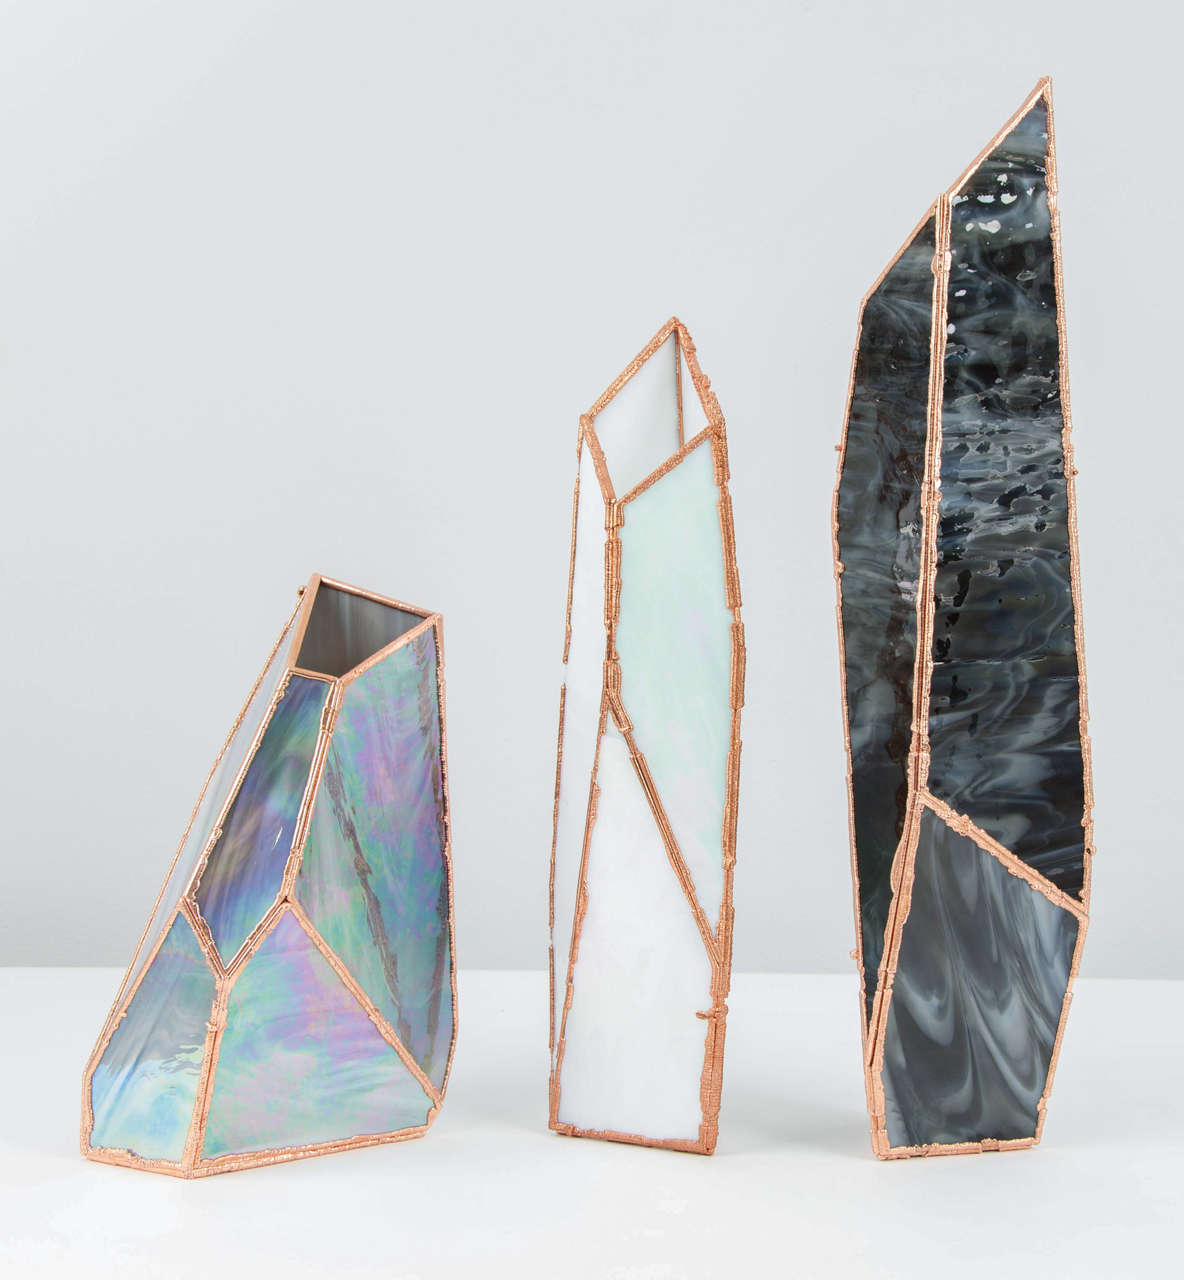 The price and dimensions shown are for the largest size.

OverNight vases, are a collection of unique glass and copper mixed colored vases by Odd Matter, a partnership of Dutch native, Els Woldhek and Bulgarian, Georgi Manassiev.

Taking